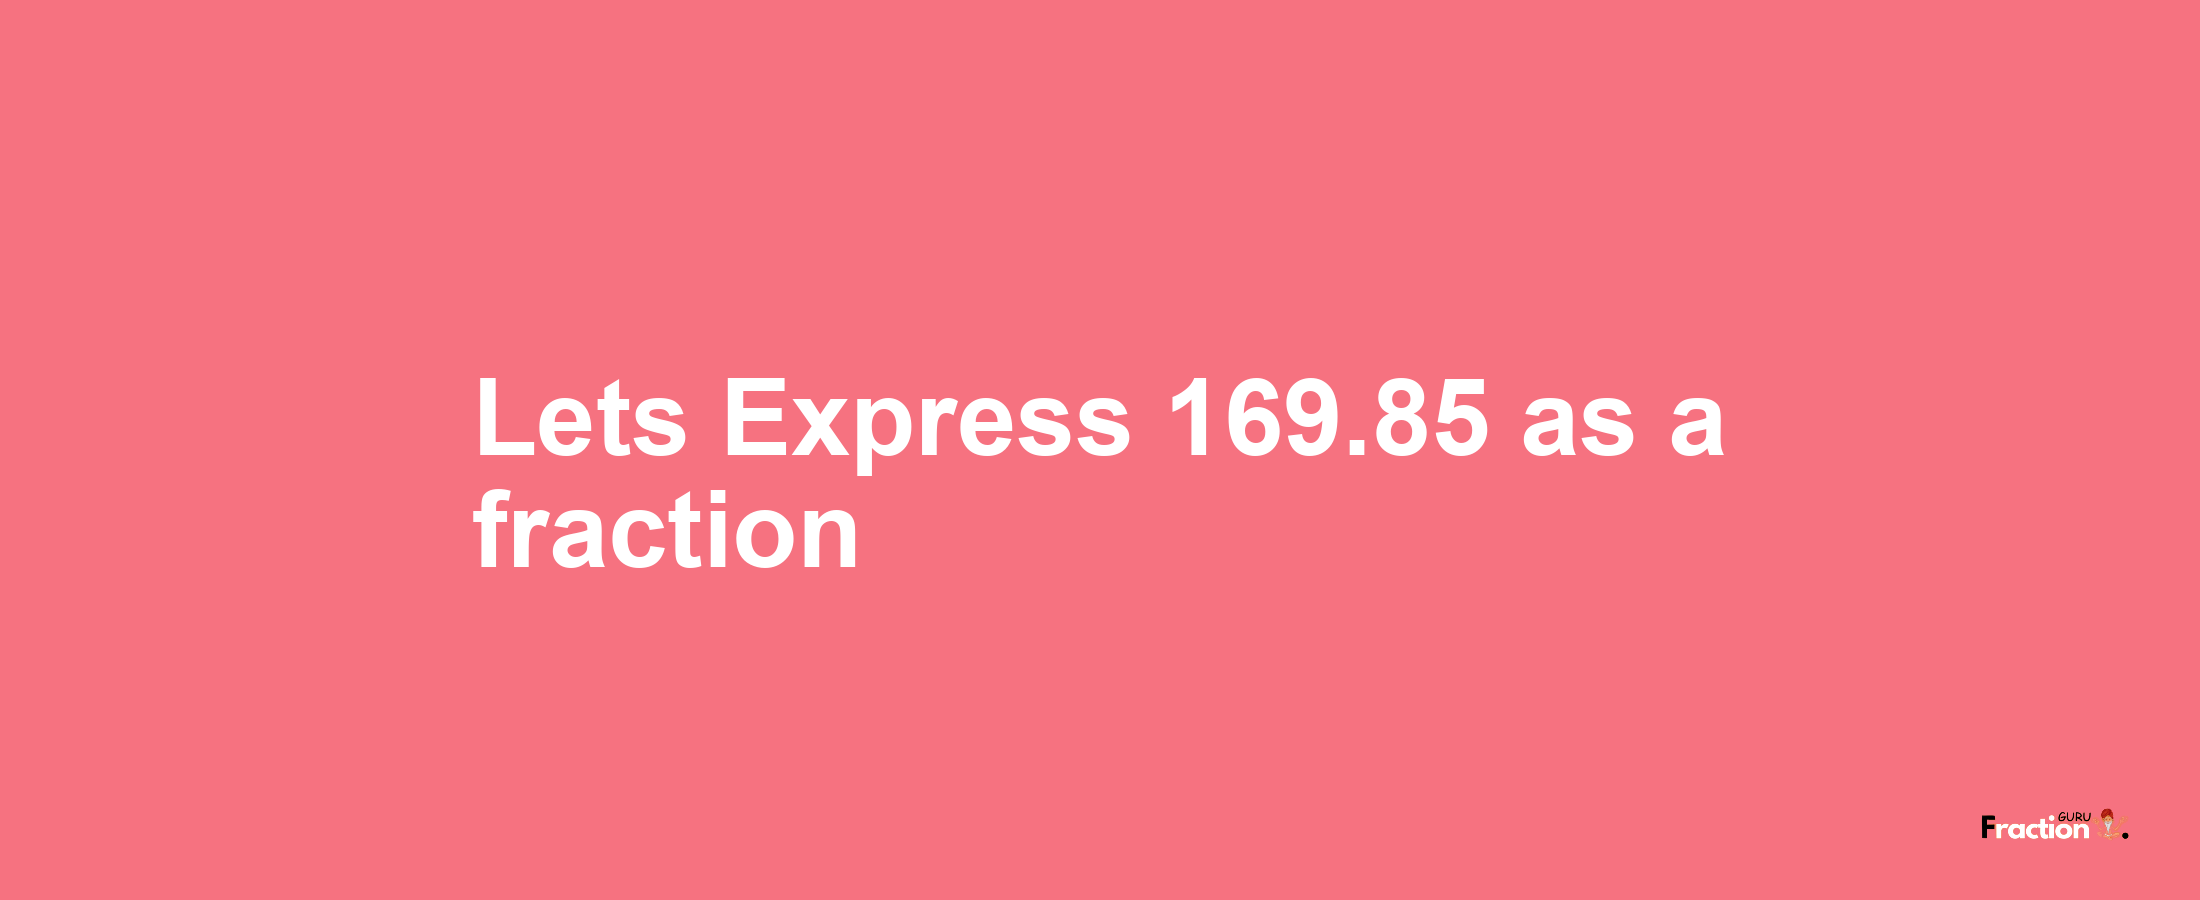 Lets Express 169.85 as afraction